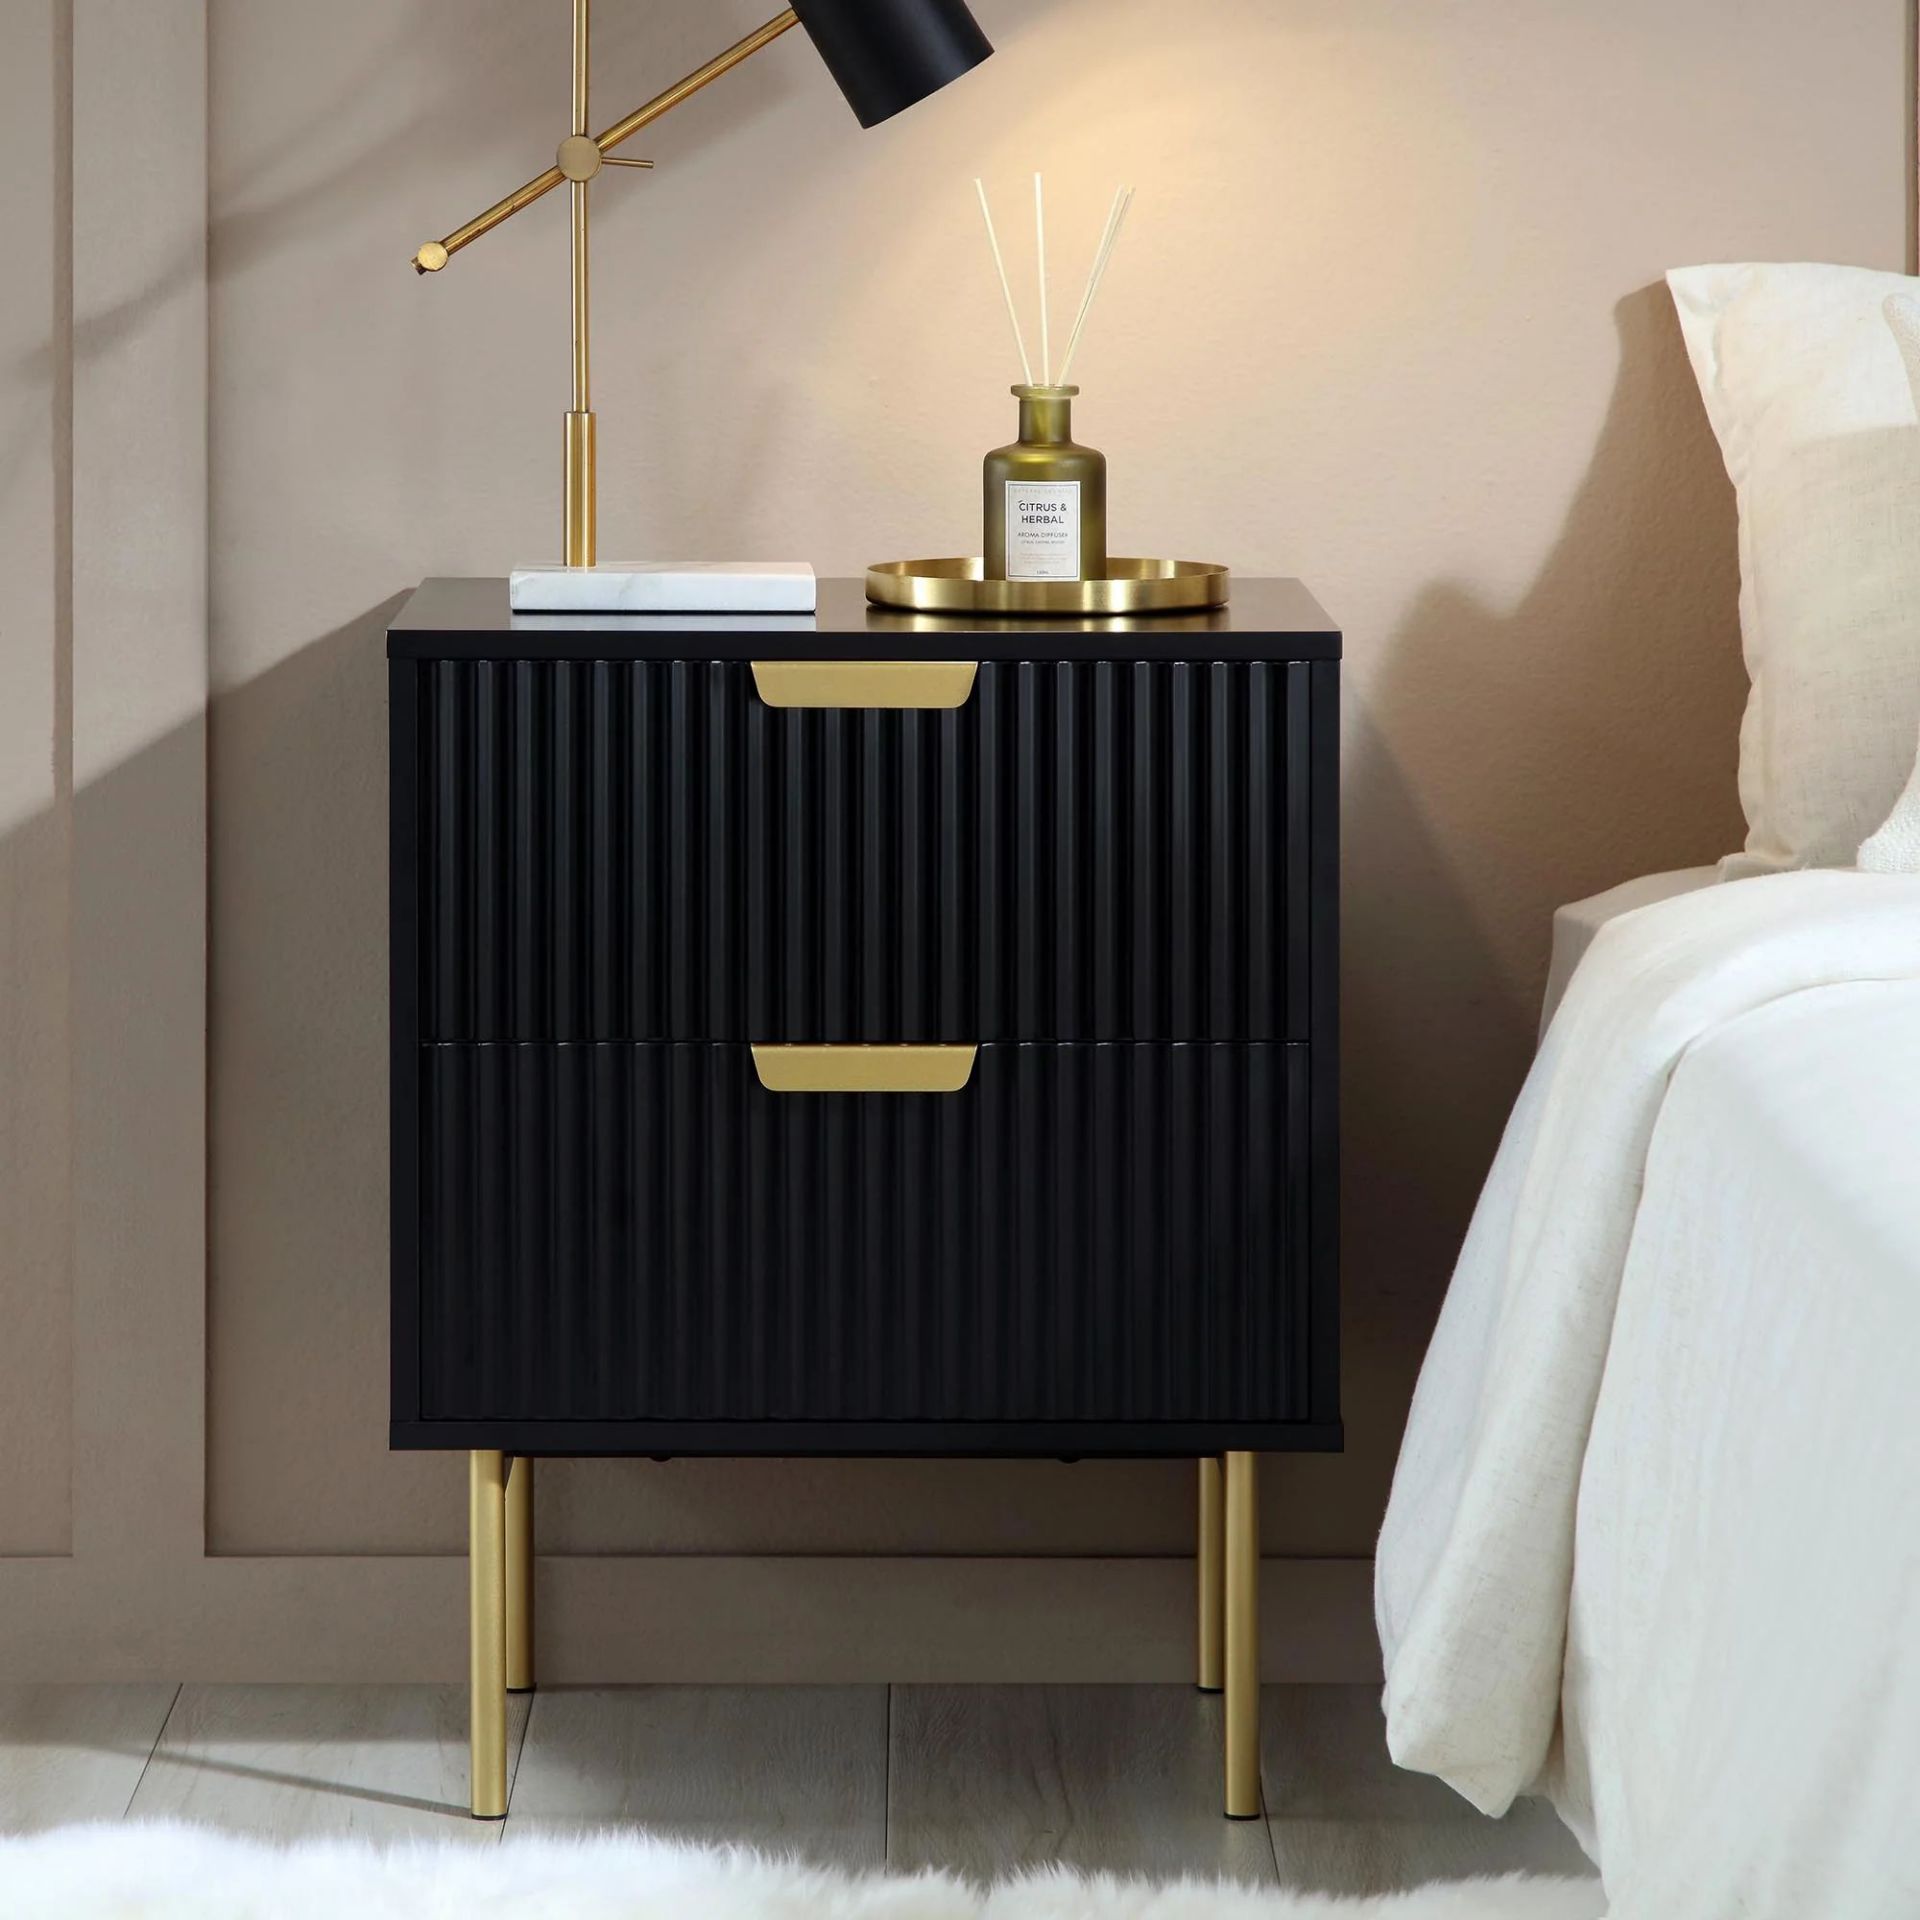 Richmond Ridged 2 Drawer Bedside Table, Matte Black. - R13.7. RRP £179.99. Our Richmond bedside - Image 3 of 4